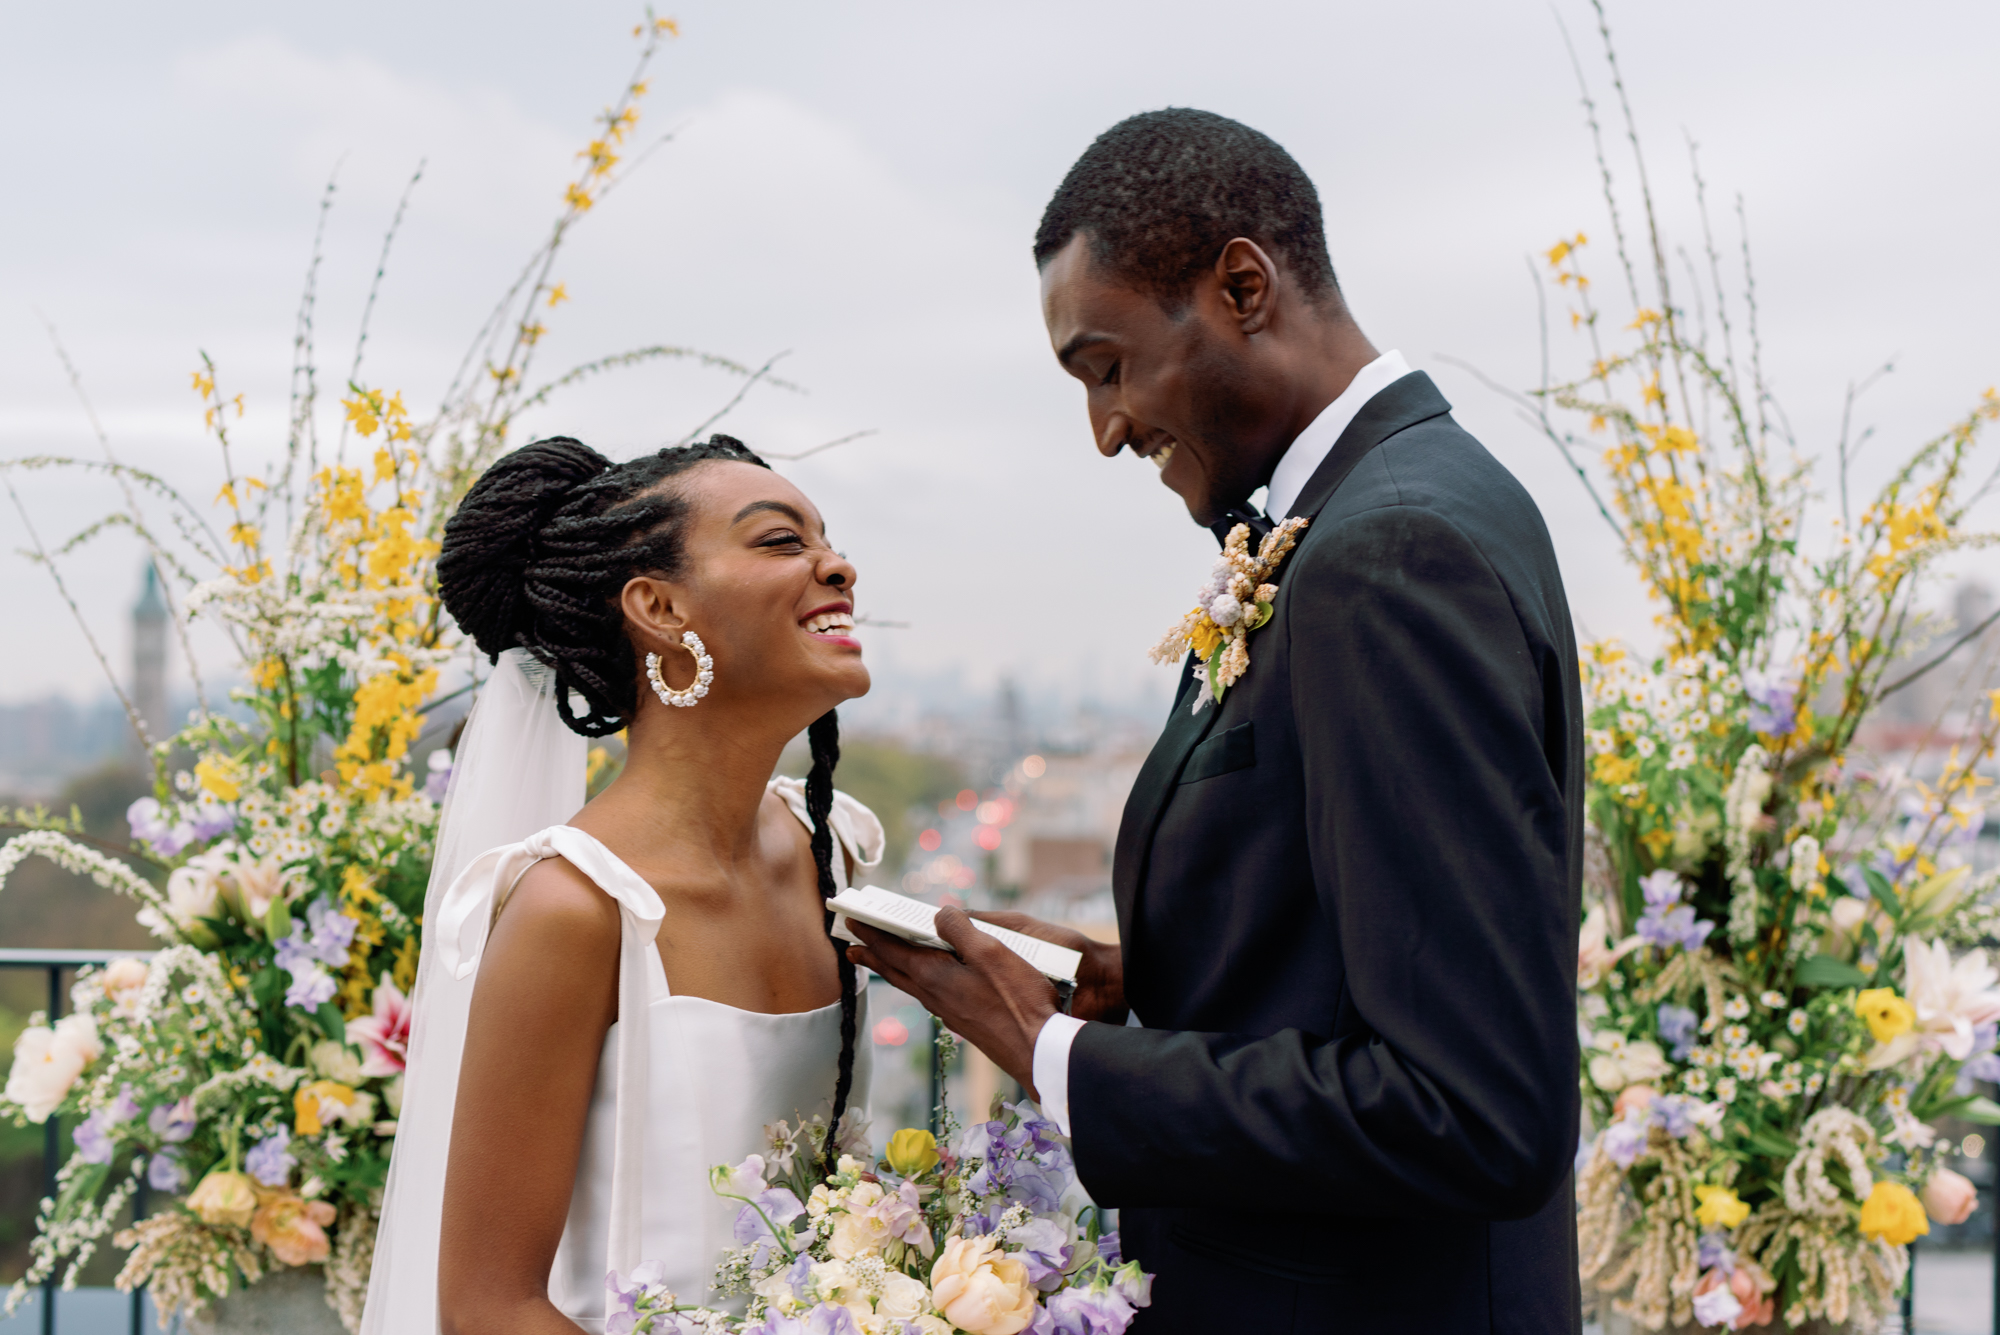 Chic modern wedding couple marries at rooftop nyc ceremony with yellow flowers surrounding them and views of the manhattan skyline